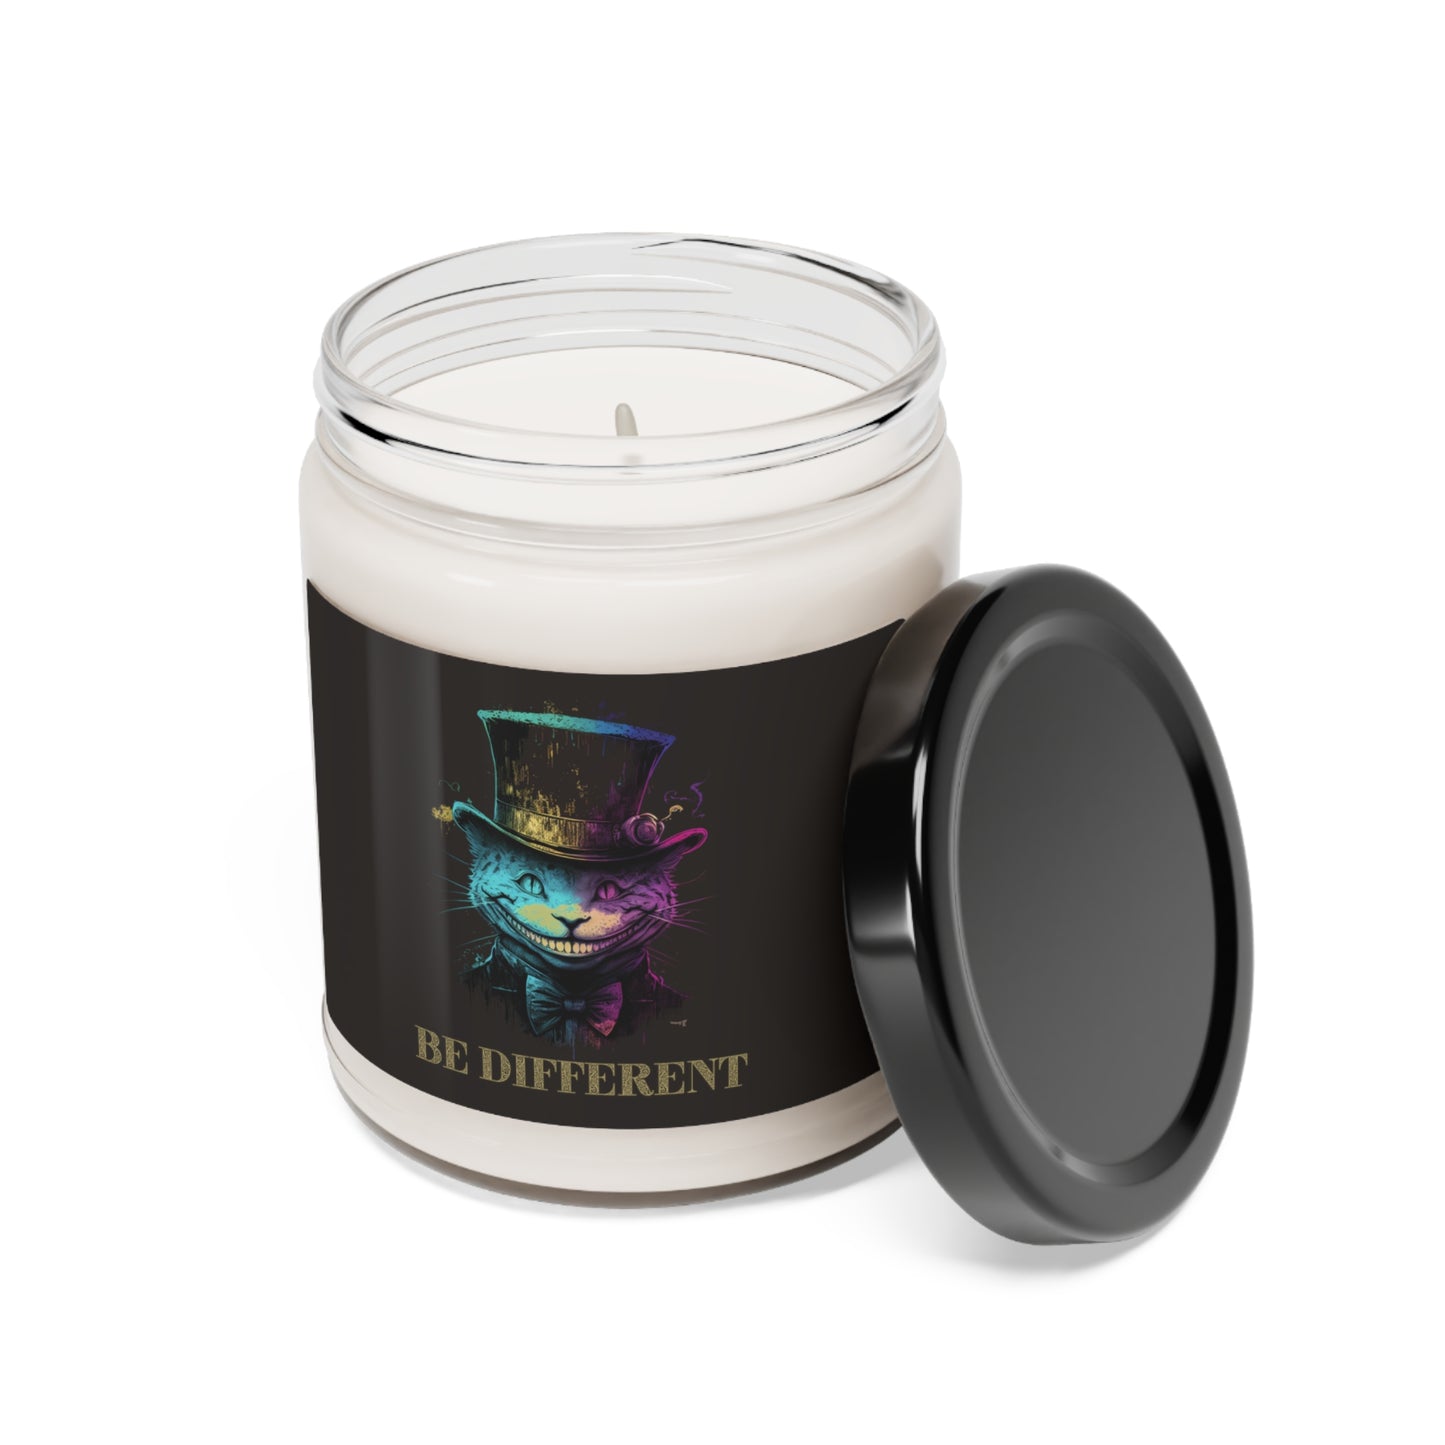 Be Different Scented Soy Candle, 9oz